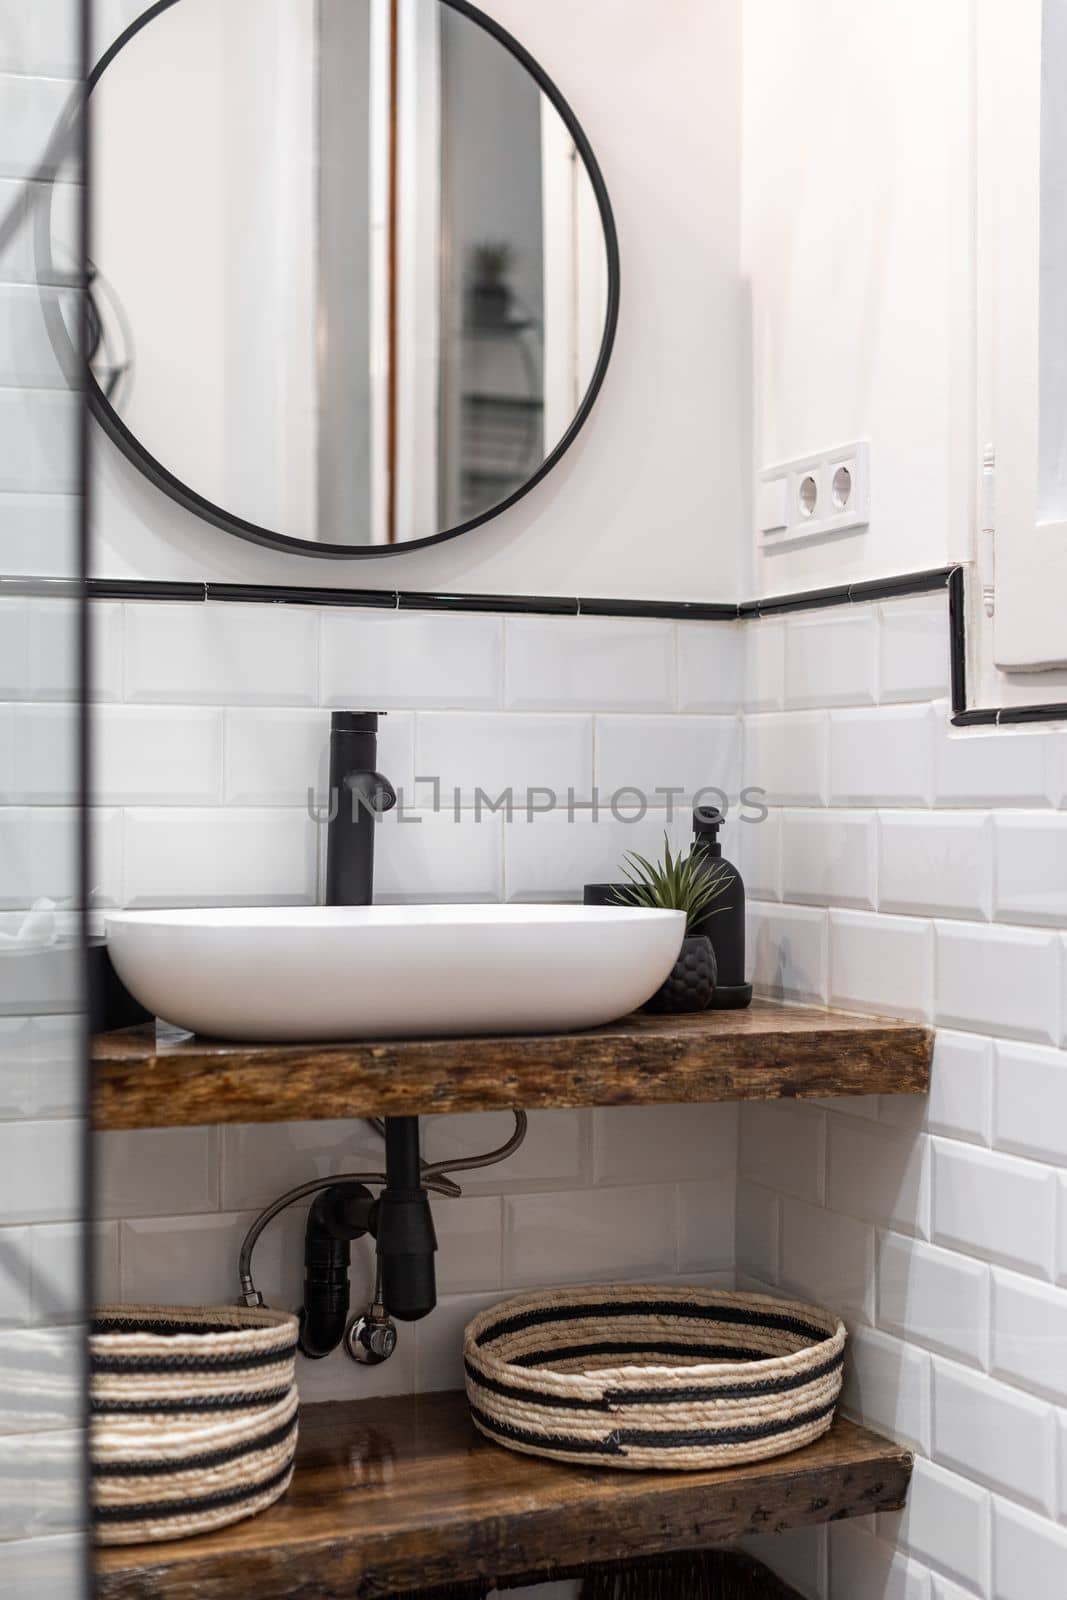 Bathroom with white brick walls, an oval washbasin on a wood-style marble top, a round mirror on a dark-framed wall reflects a doorway. Black ceramic faucet and wicker baskets under the sink. by apavlin